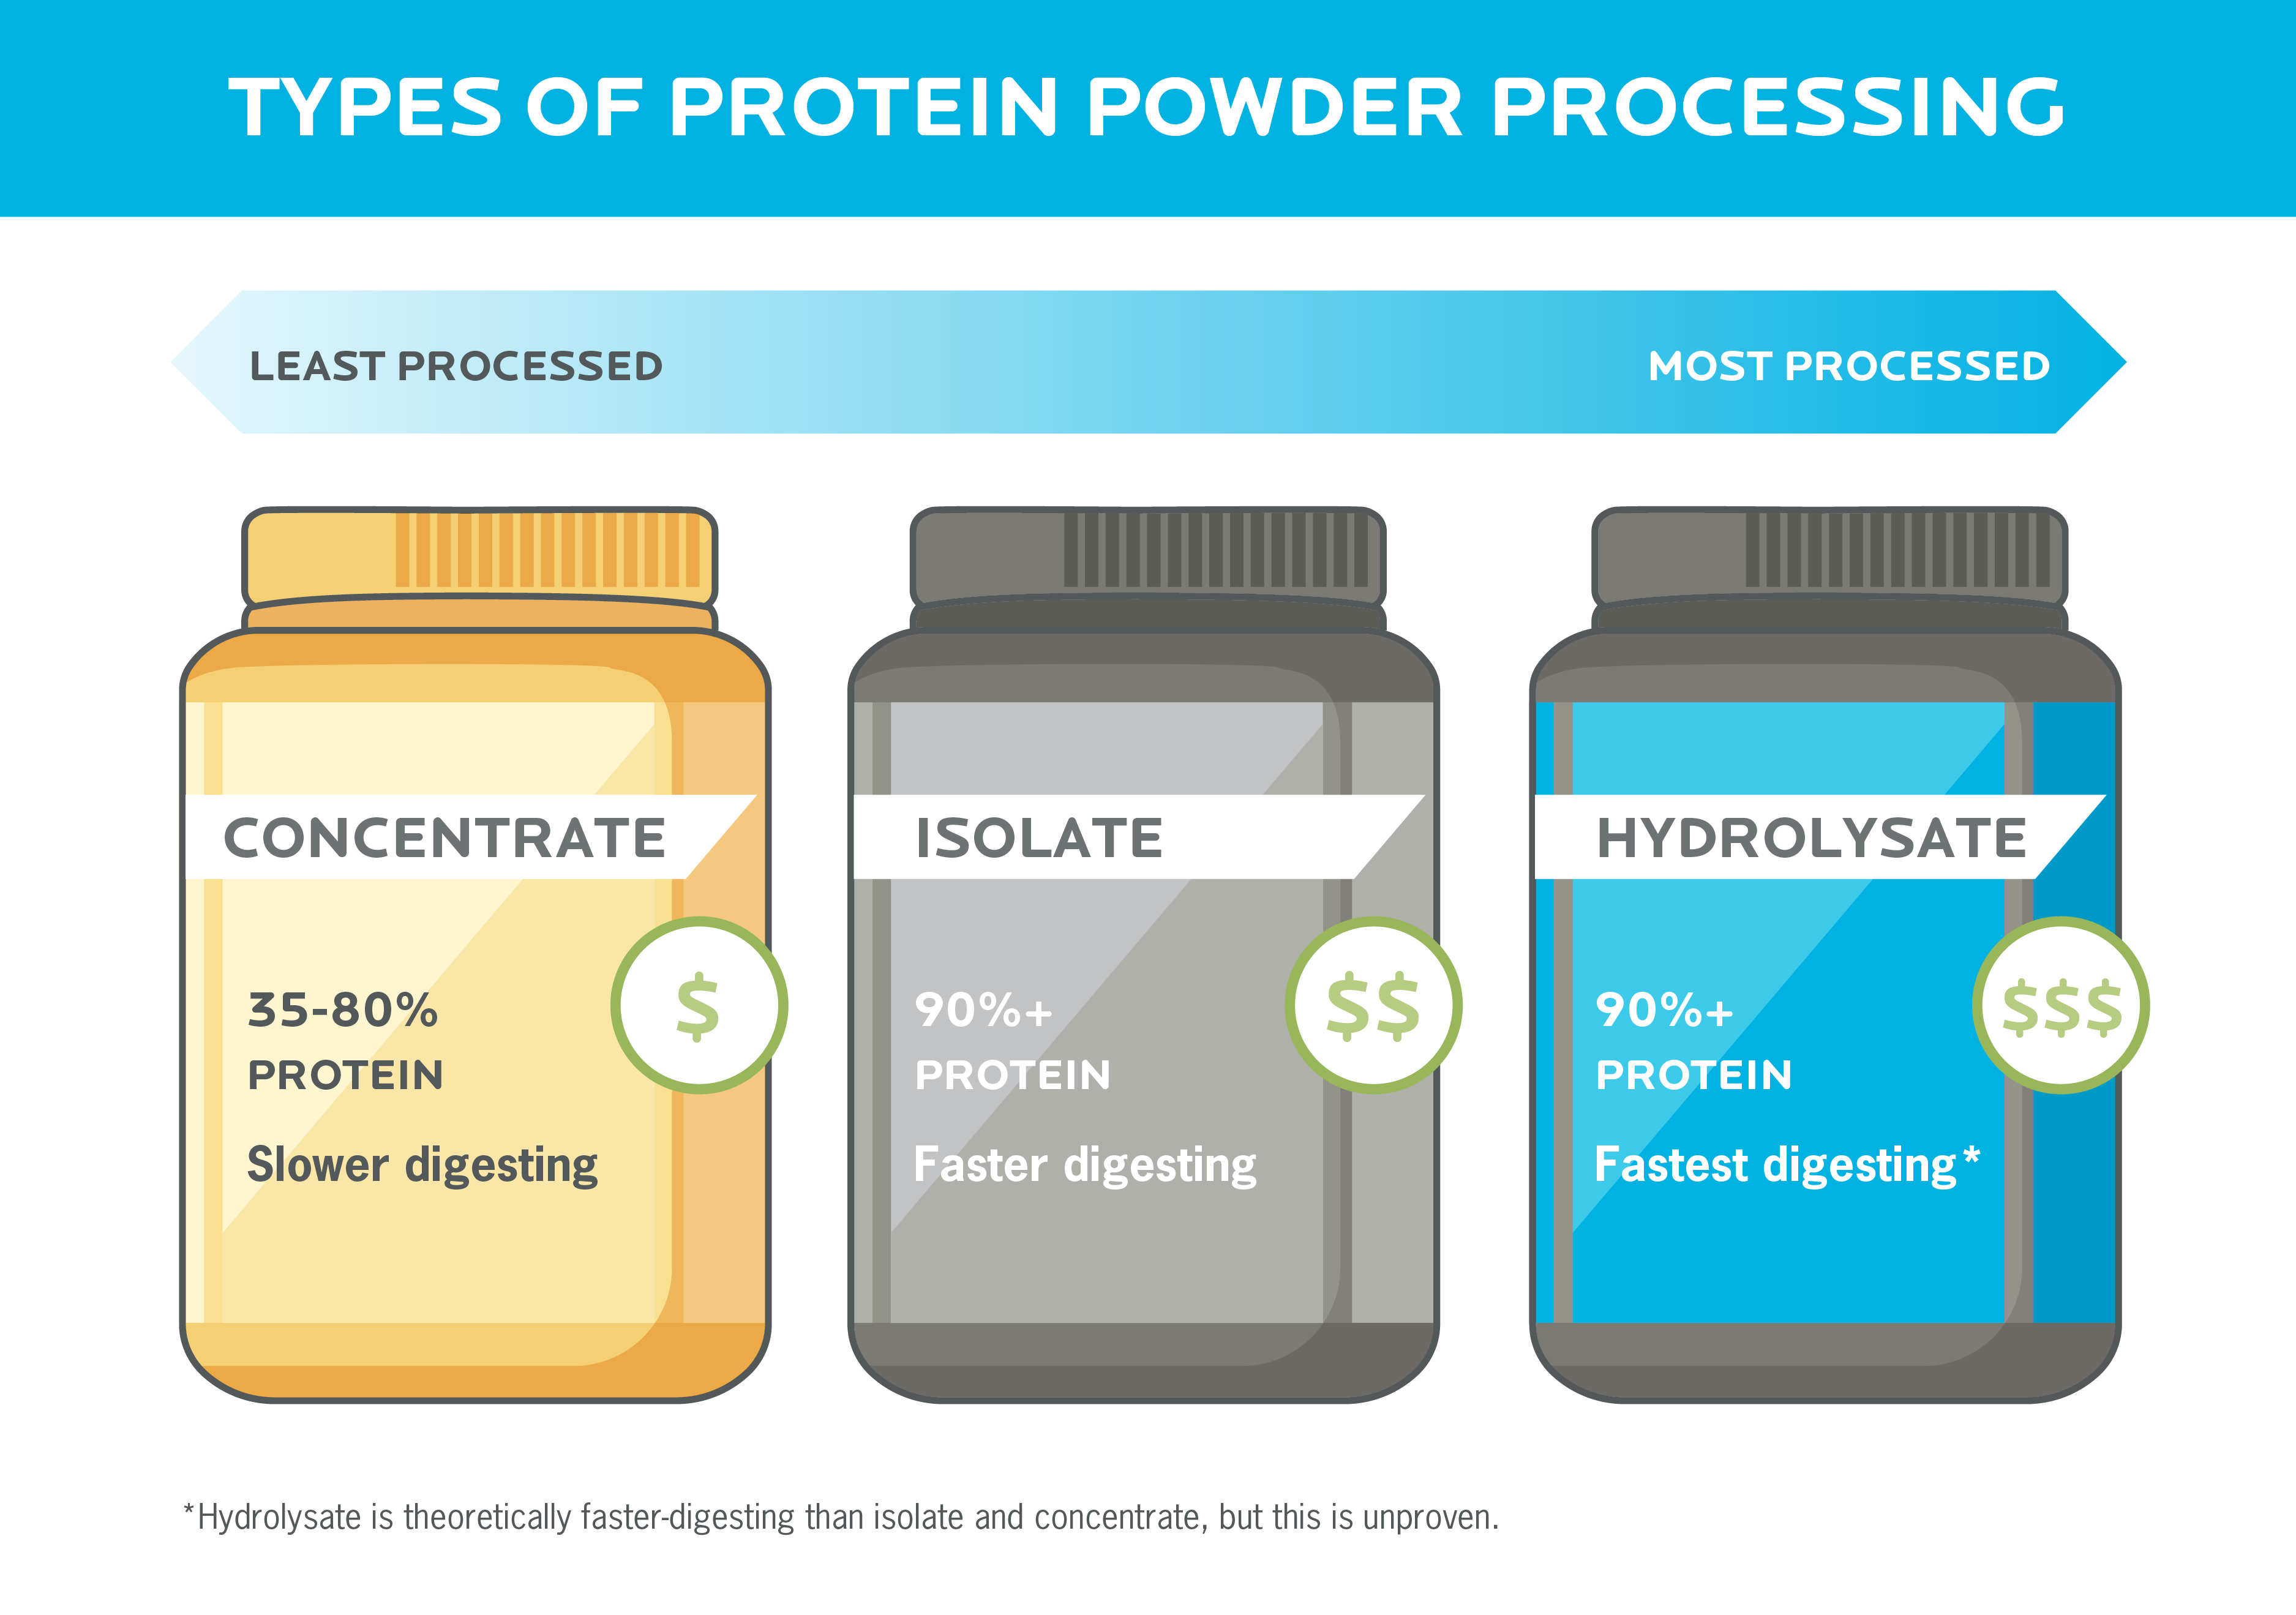 7 Things to Look for When Choosing a Whey Isolate Supplement – DMoose